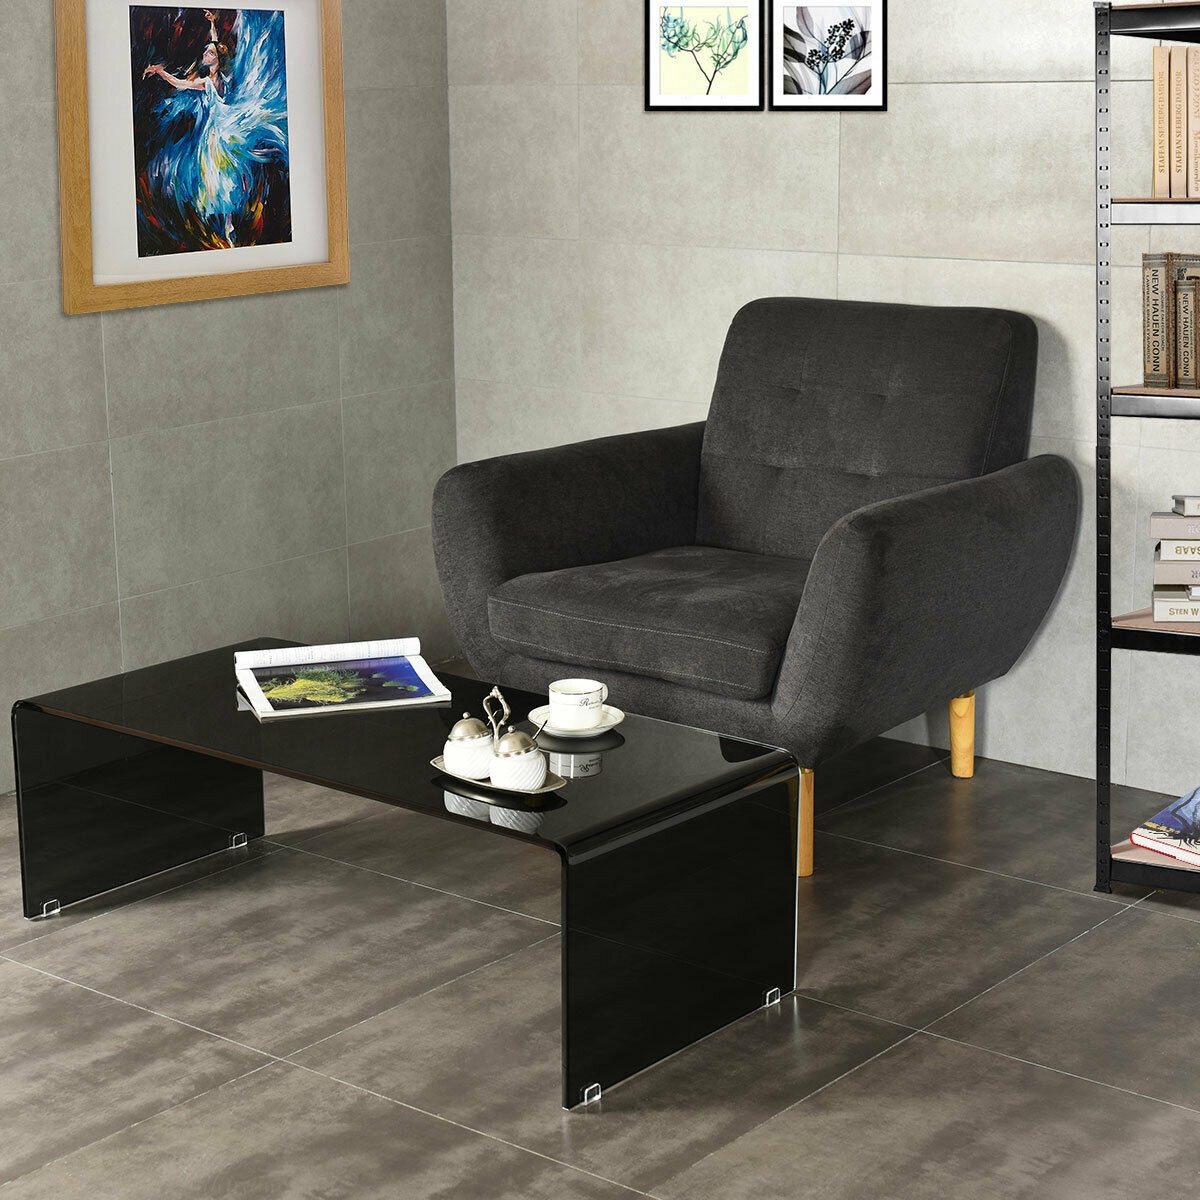 42.0 In. x 19.7 In. Tempered Glass Coffee Table